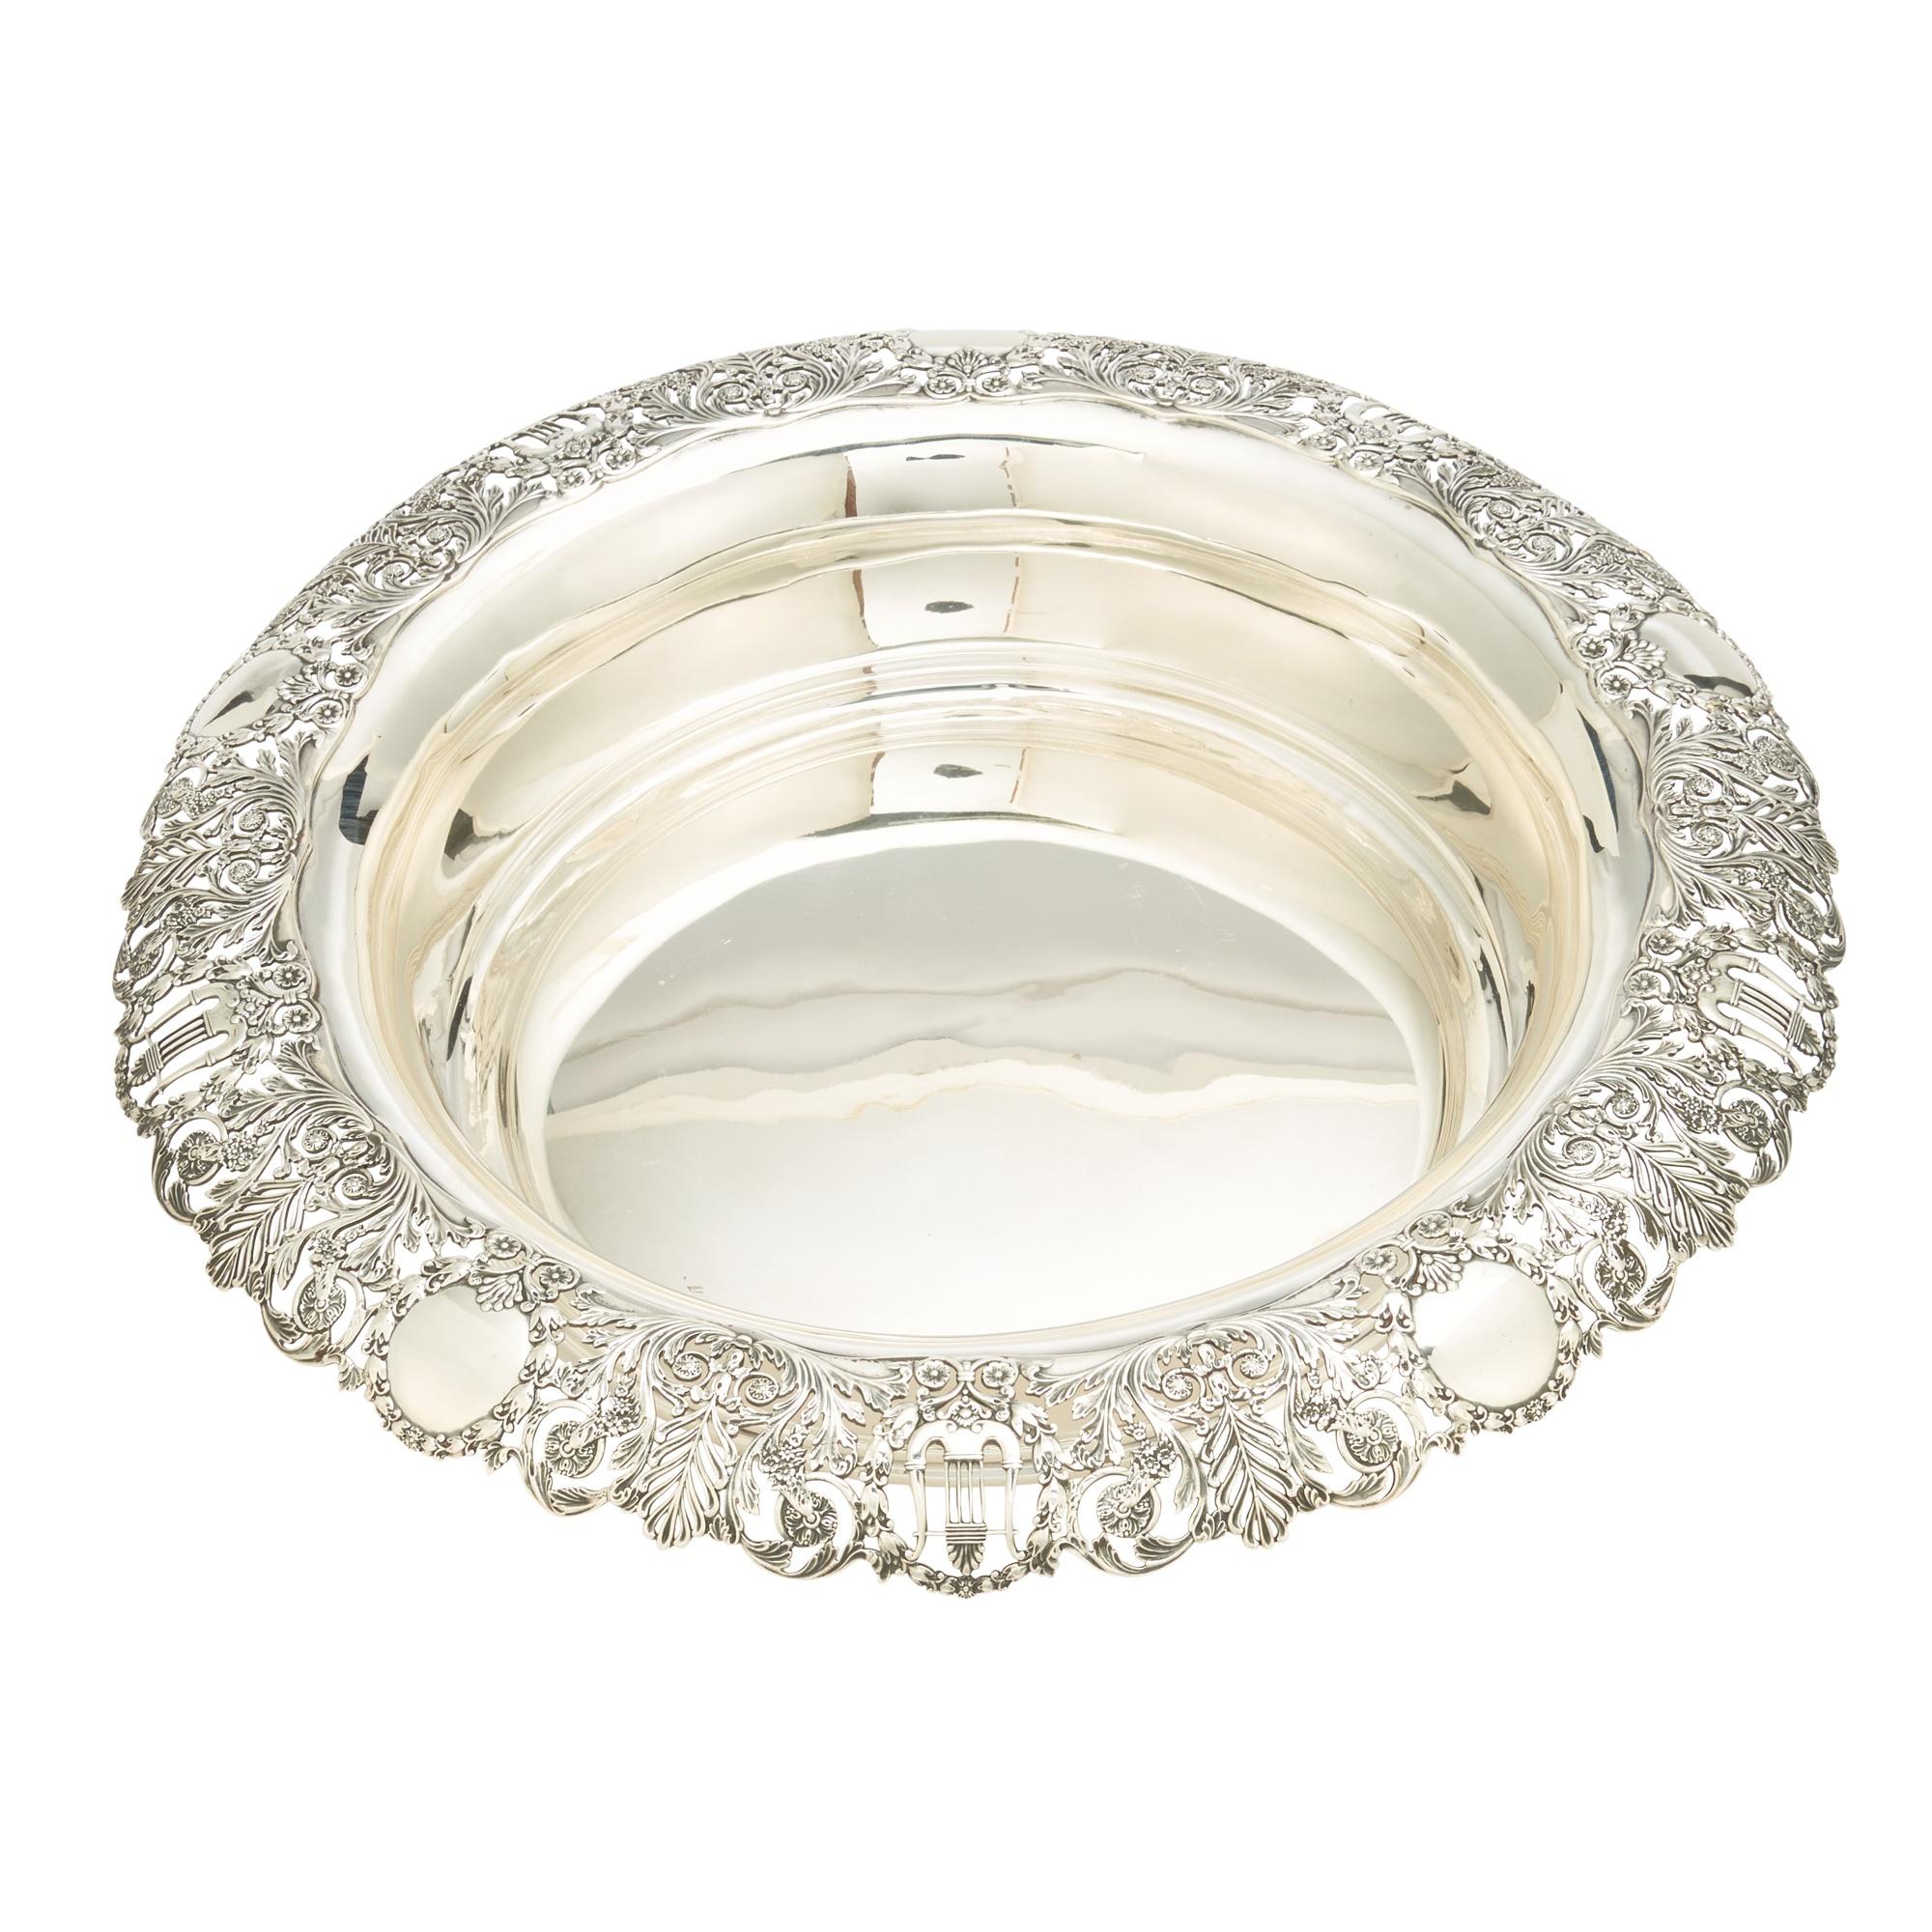 Indulge in the timeless elegance of this early 19th-century sterling silver tableware centerpiece, crafted in the United States by B. Starr. This exquisite piece features a circular shape with an everted decorated rim, adorned with an openwork